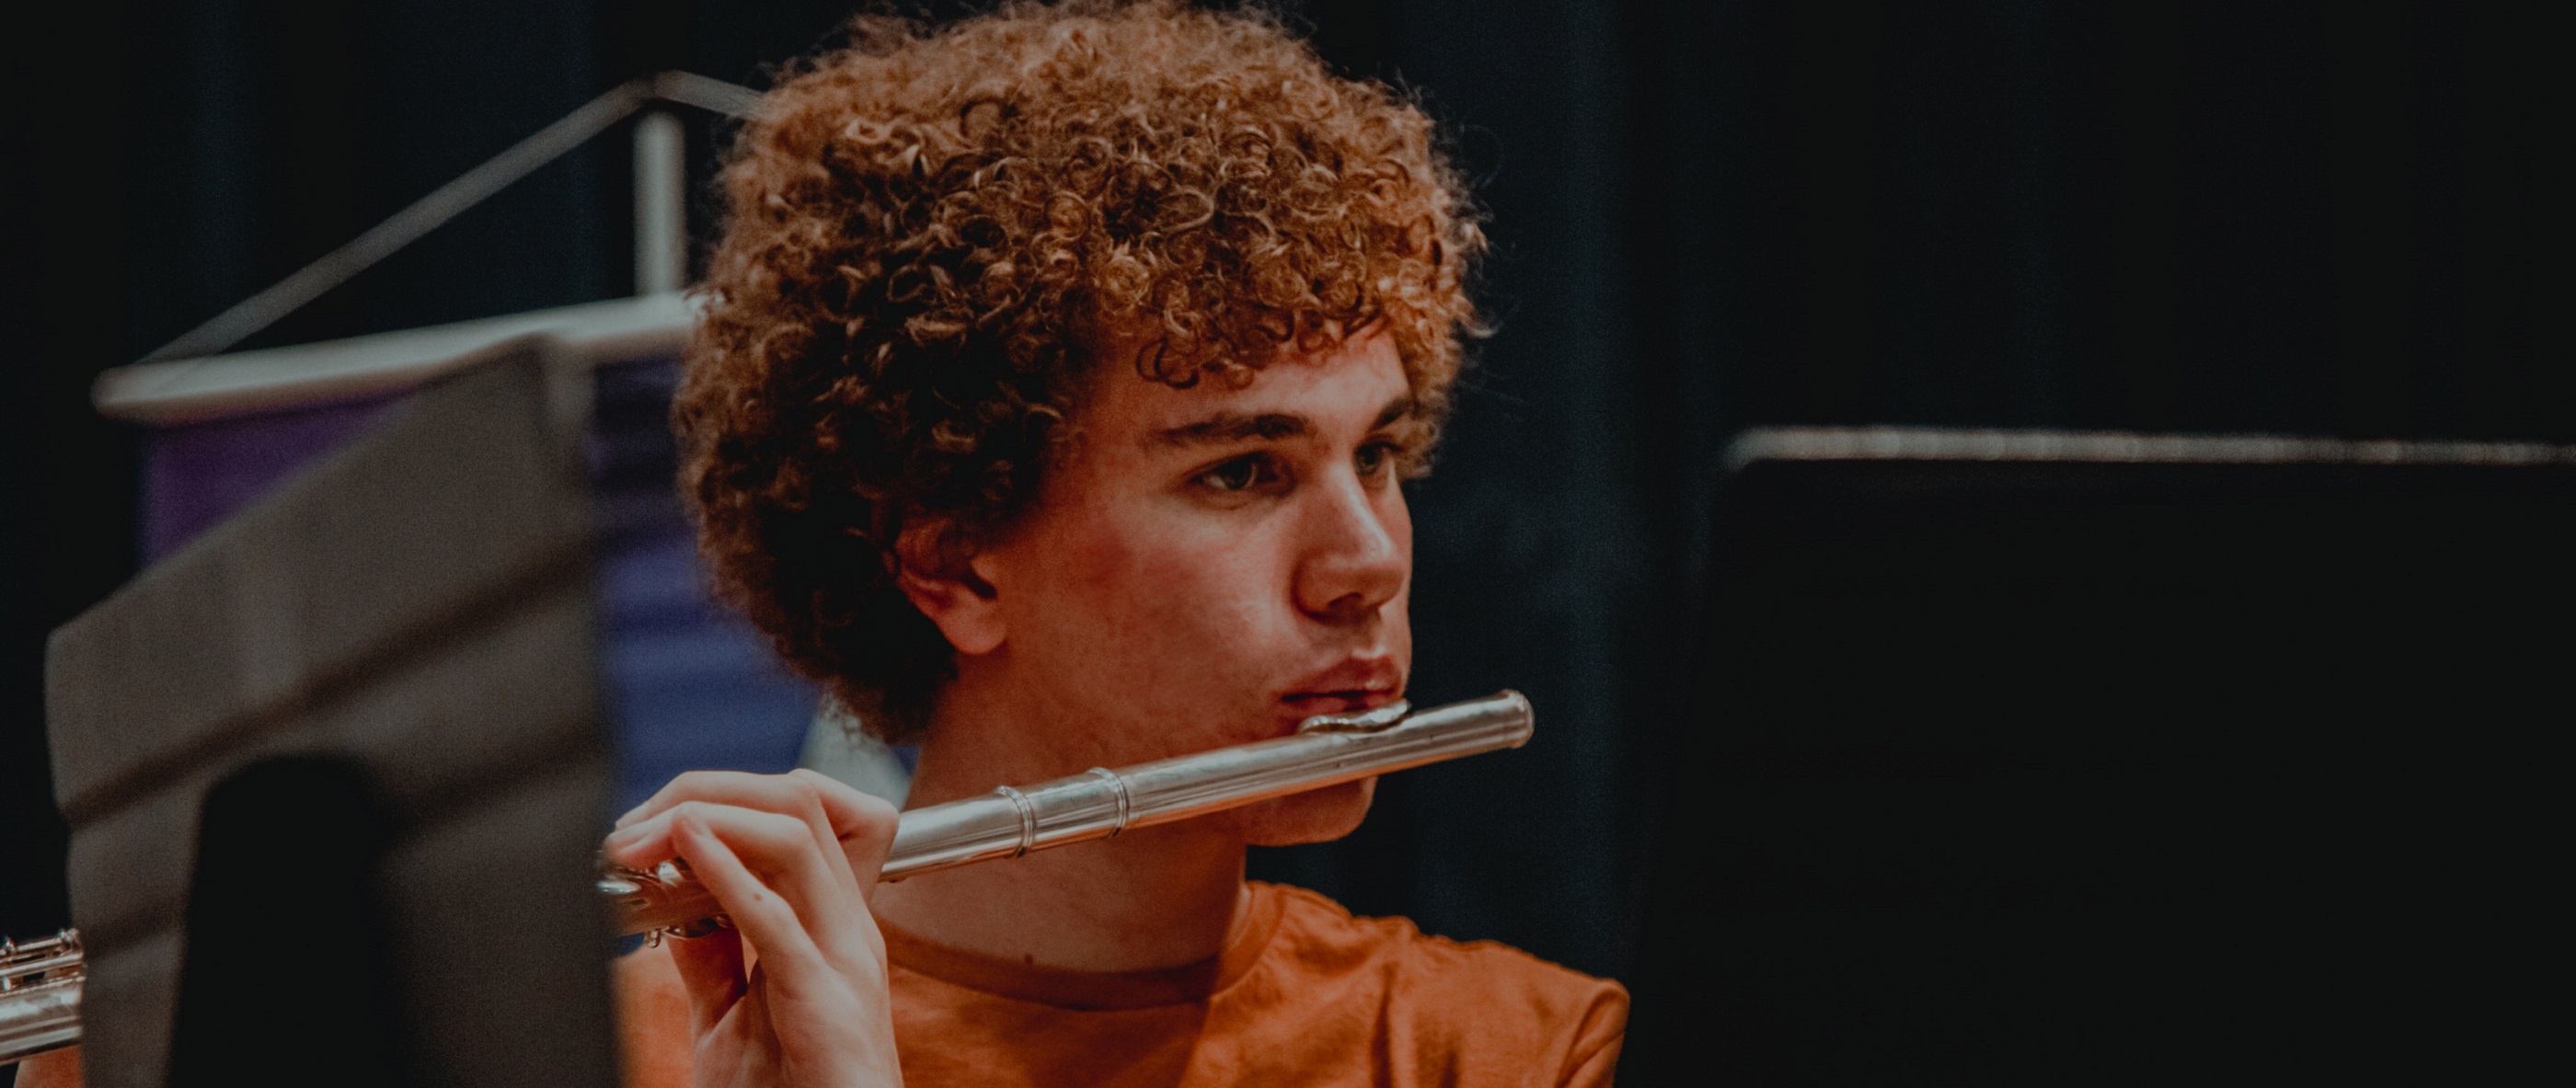 Introducing the 2022 Woodwind and Jazz Woodwind syllabuses